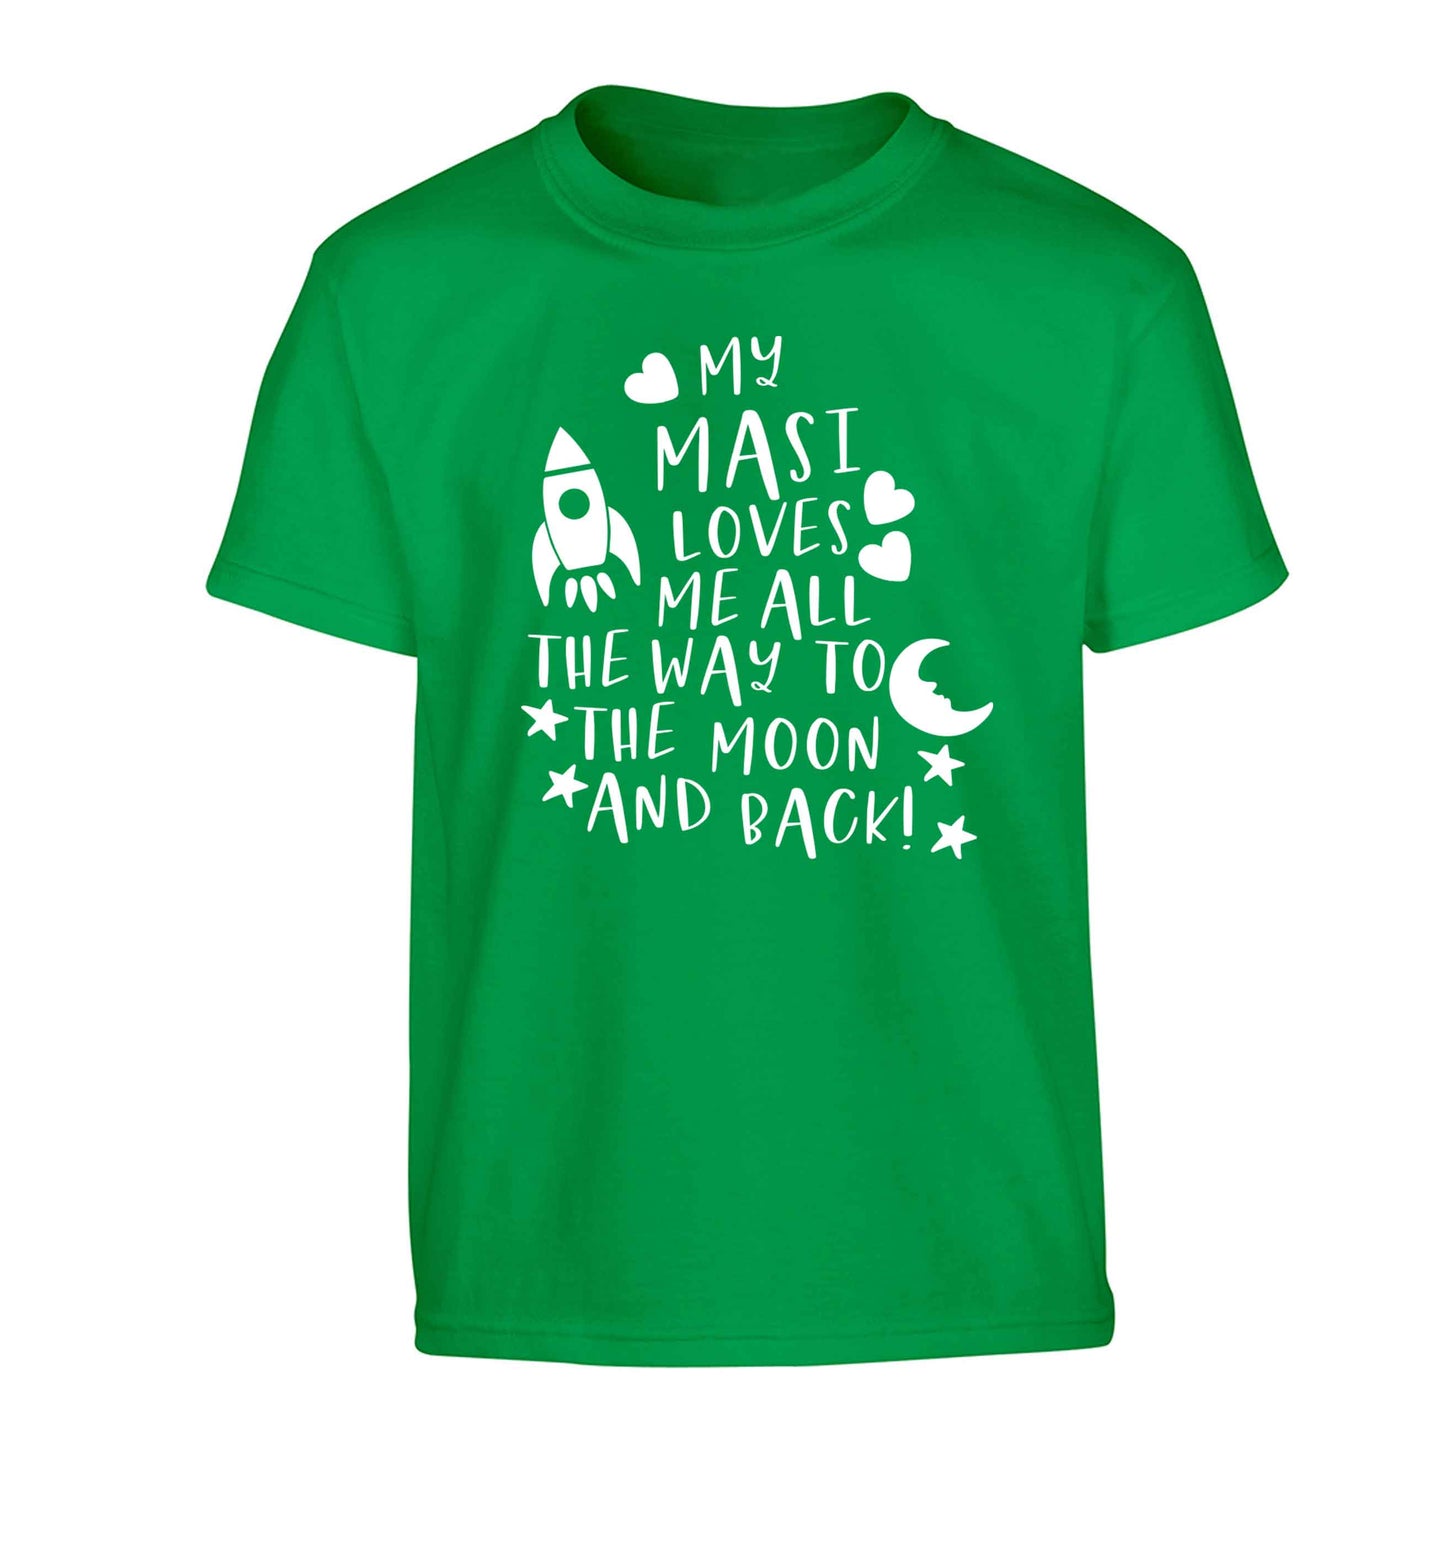 My masi loves me all the way to the moon and back Children's green Tshirt 12-13 Years